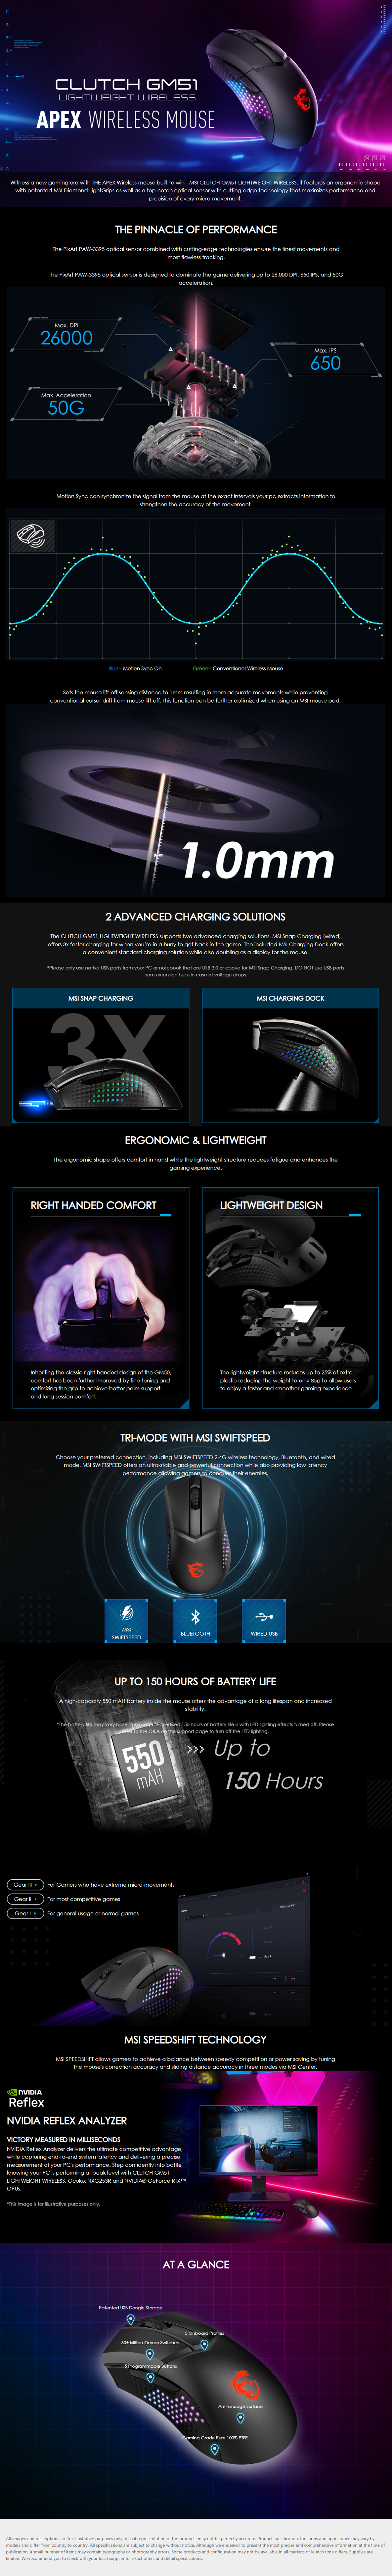 A large marketing image providing additional information about the product MSI Clutch GM51 Lightweight Wireless Gaming Mouse - Additional alt info not provided